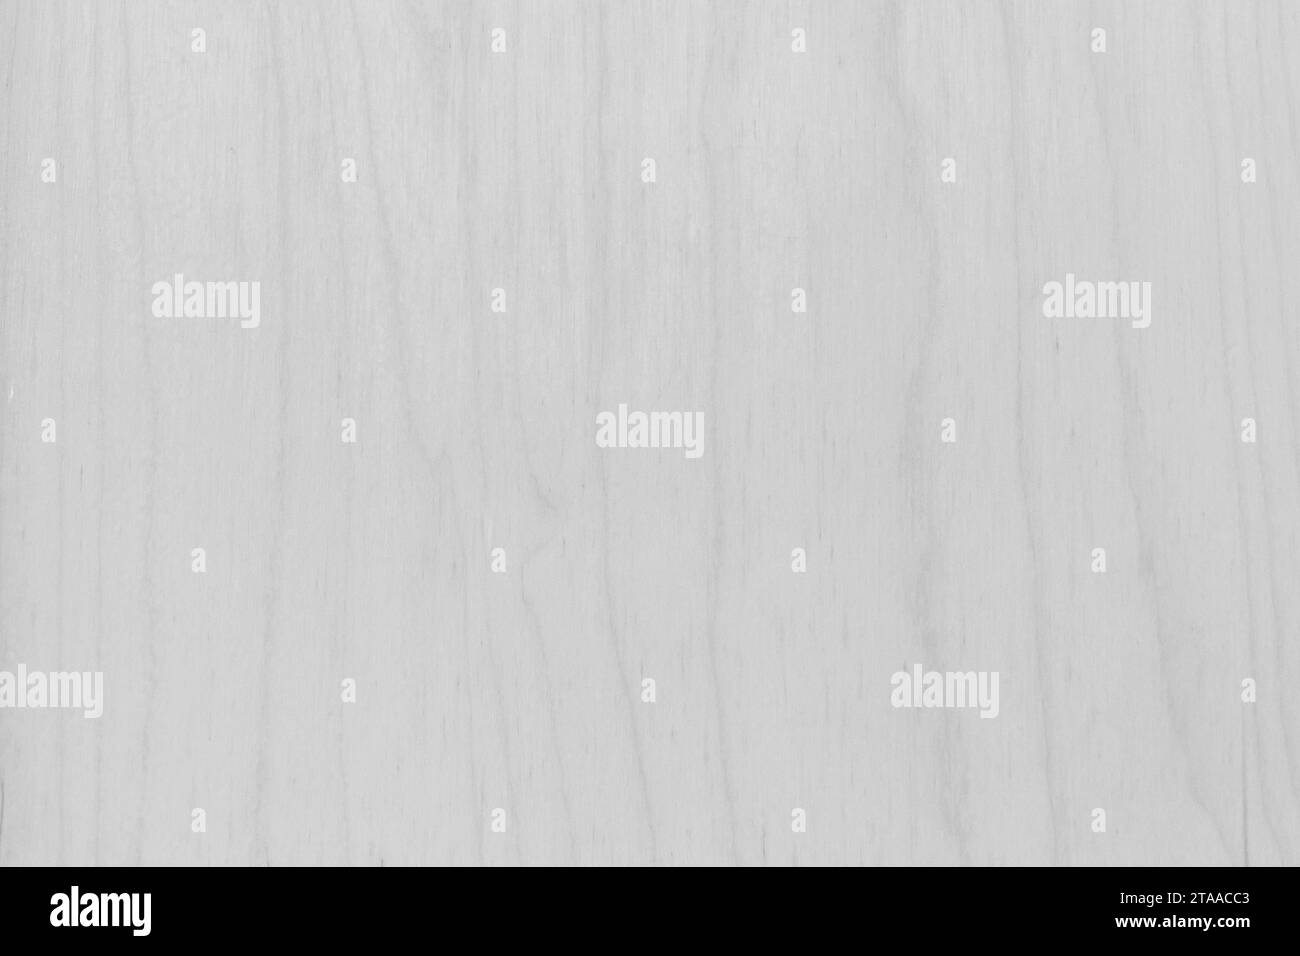 Light White Smooth Surface With Abstract Natural Wood Pattern Texture Boards Background Wooden Backdrop Plank. Stock Photo